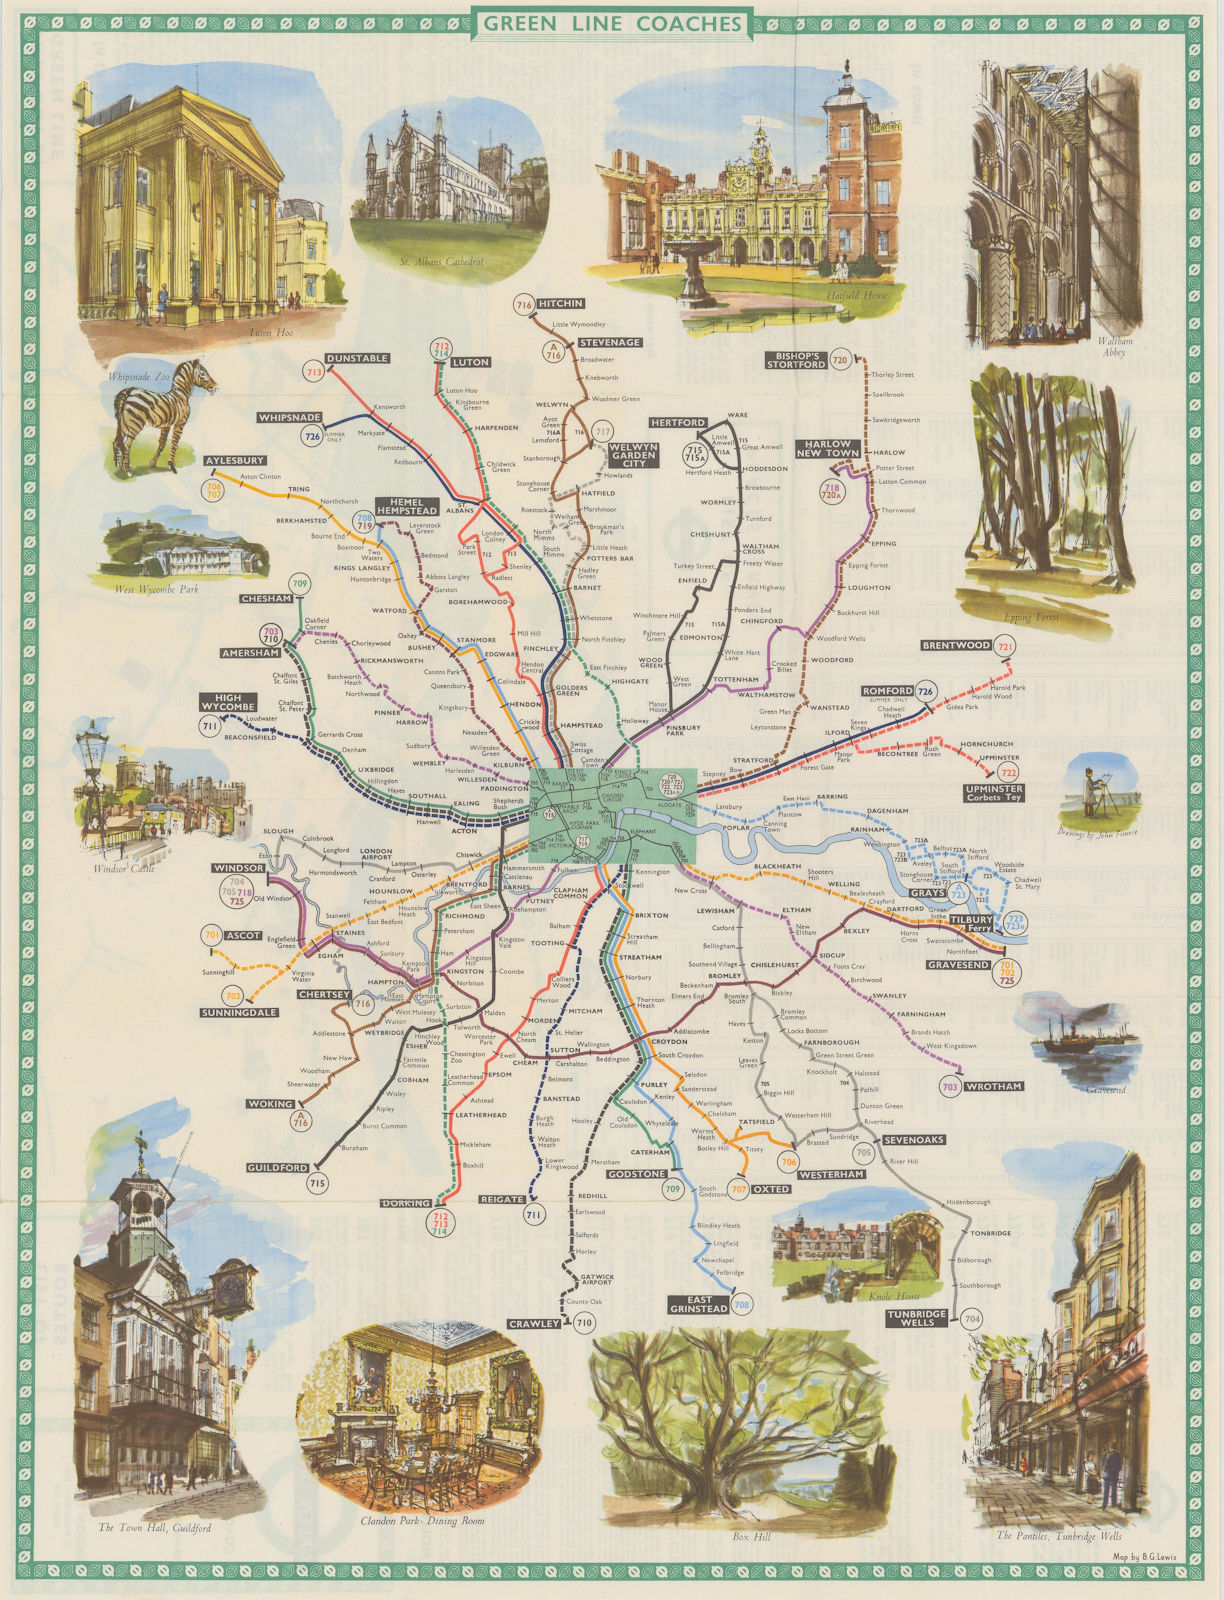 London Transport Green Line Coach Routes. LEWIS 1962 old vintage map chart